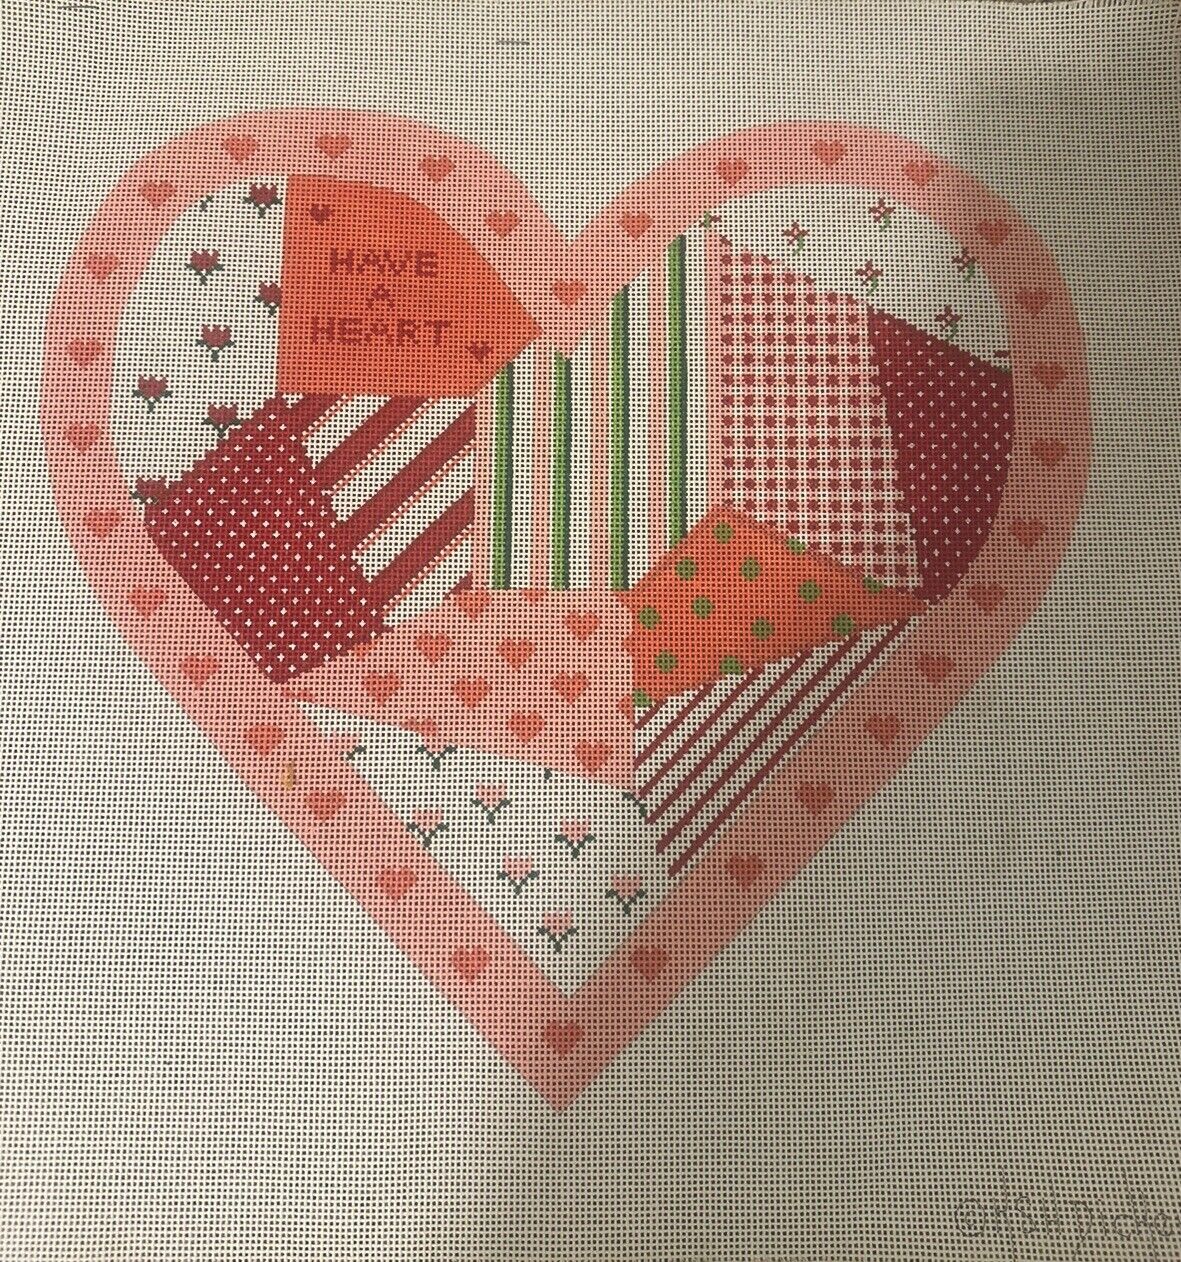 Kate Dickerson Patchwork Heart Handpainted Needlepoint Canvas with STITCH GUIDE